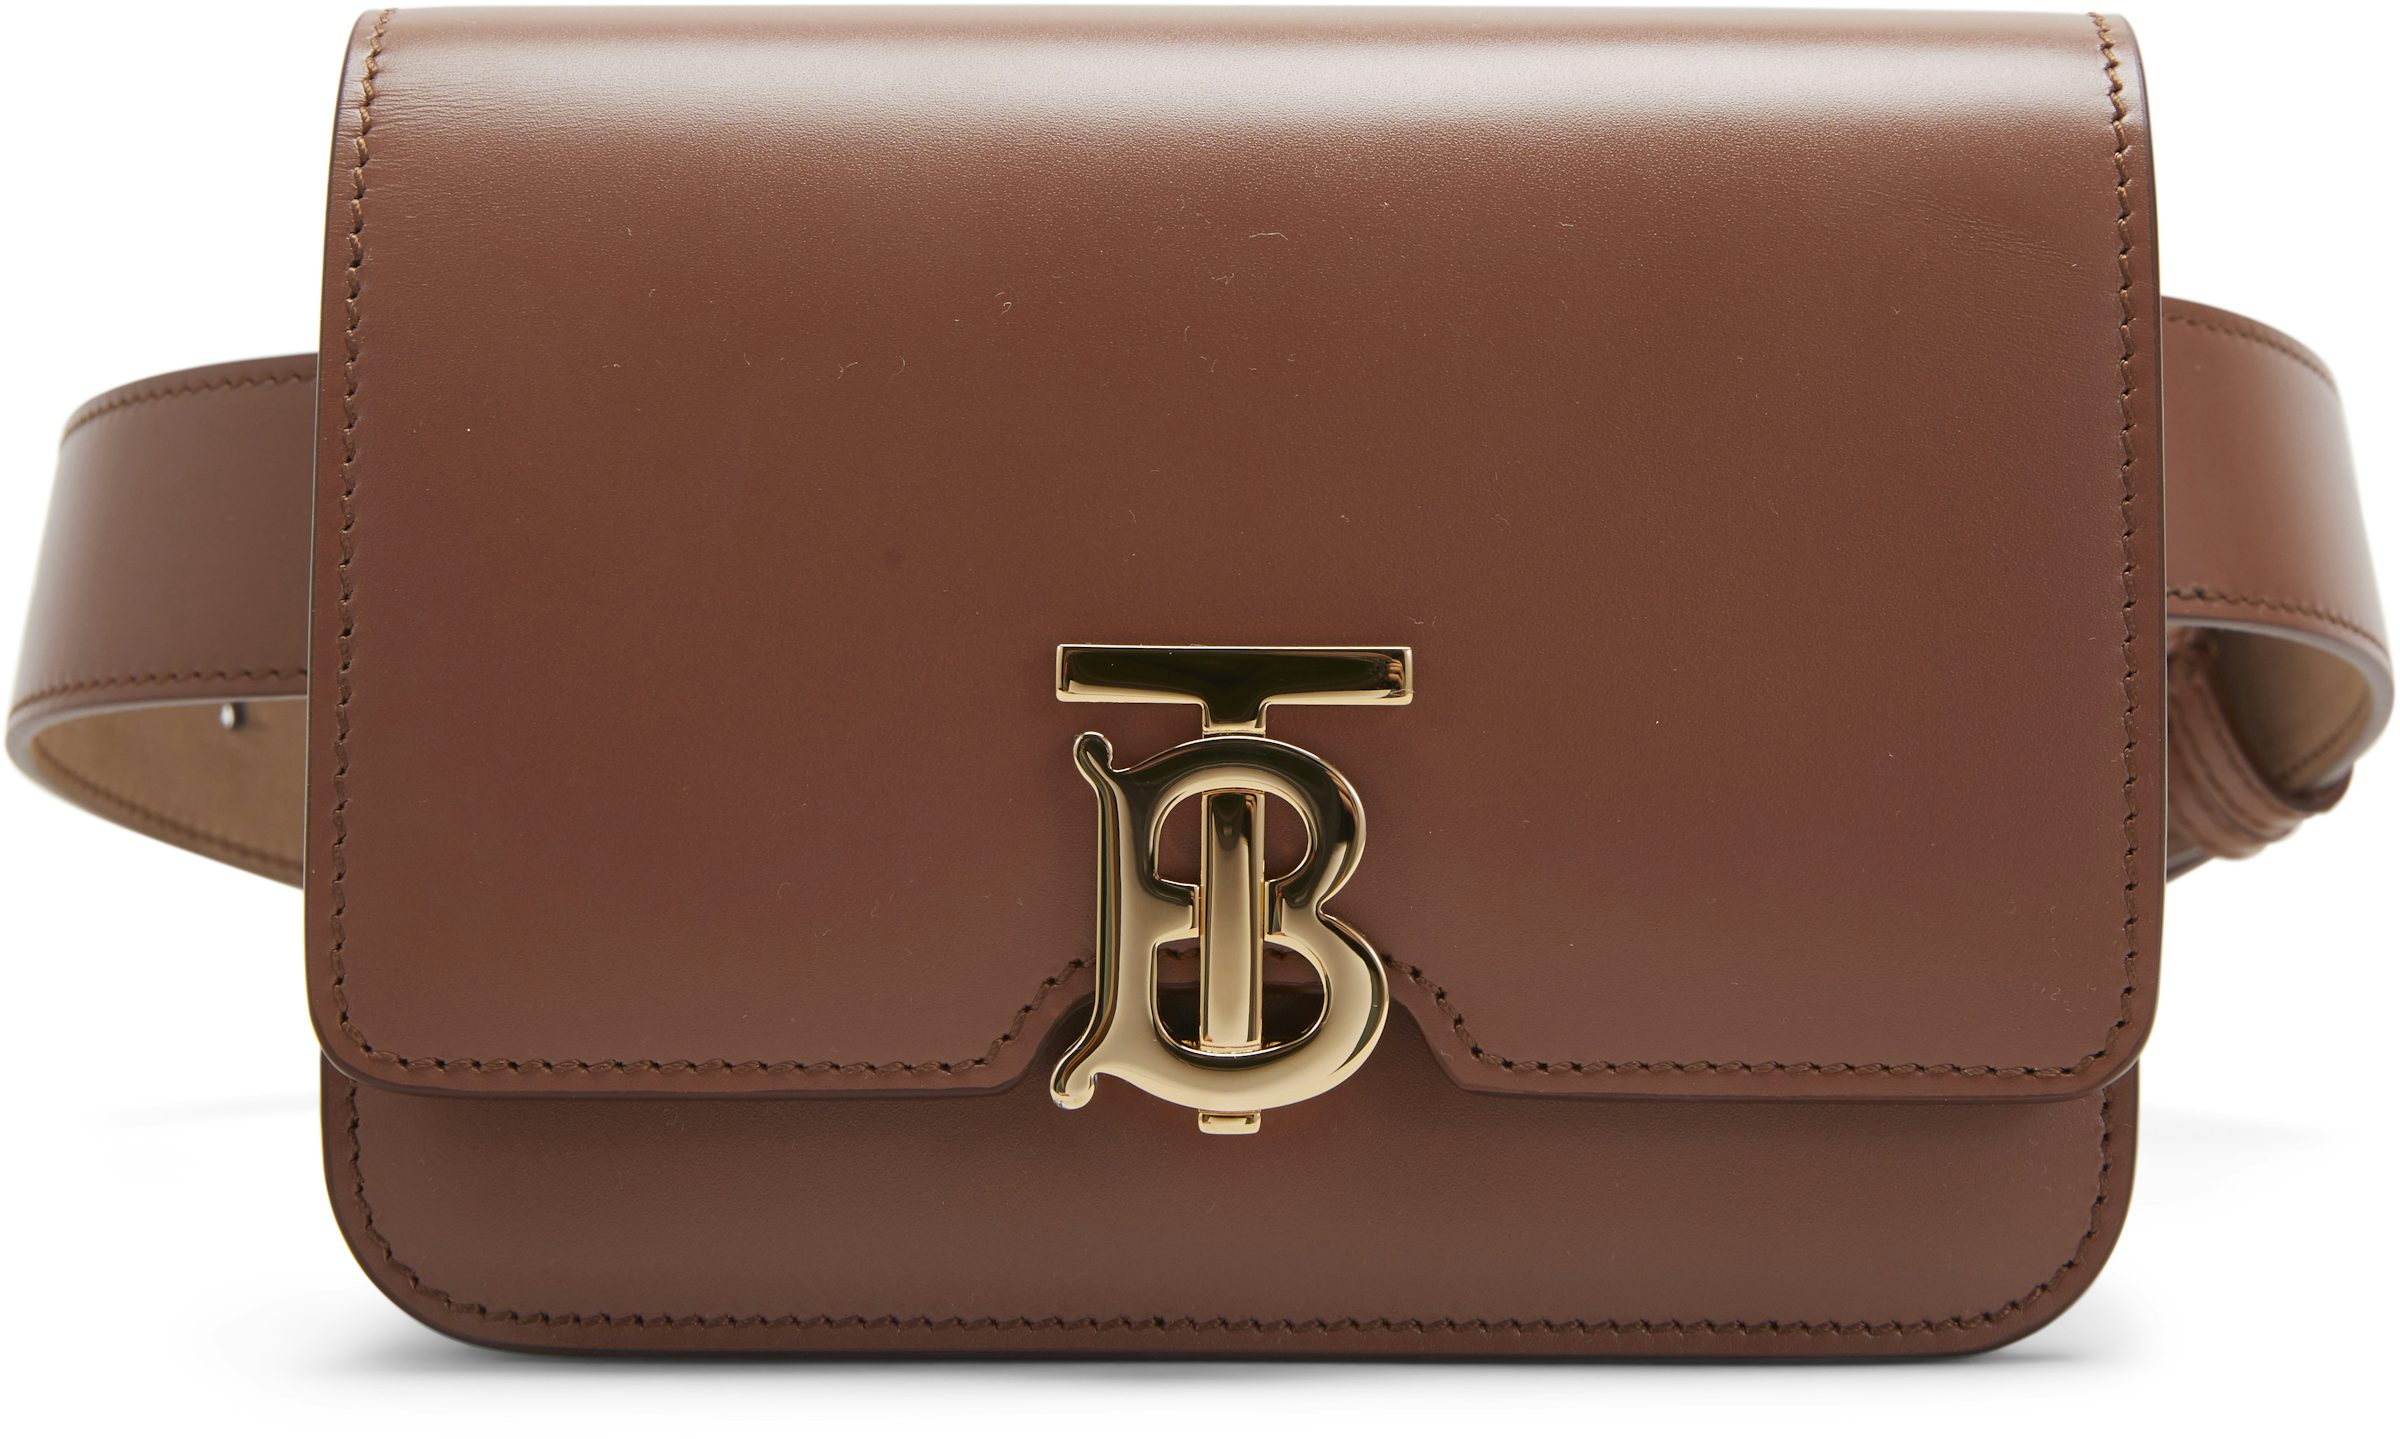 Burberry Belted Leather TB Bag Malt Brown in Calfskin with Gold